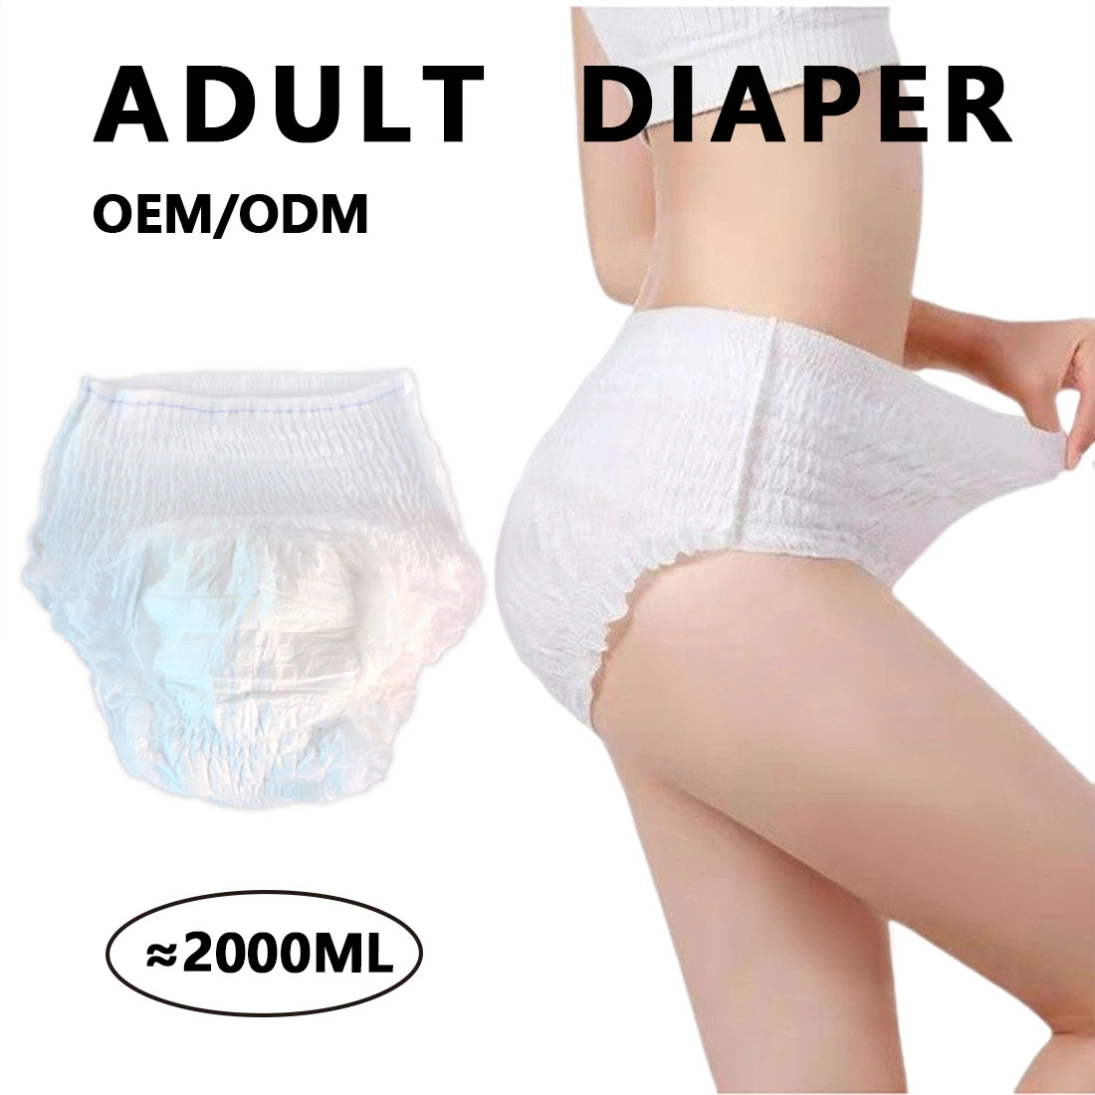 Adult Care Products Disposable Adult Diaper Pull Up New Products (одноразовые подгузники для взрослых Поиск дистрибьютора